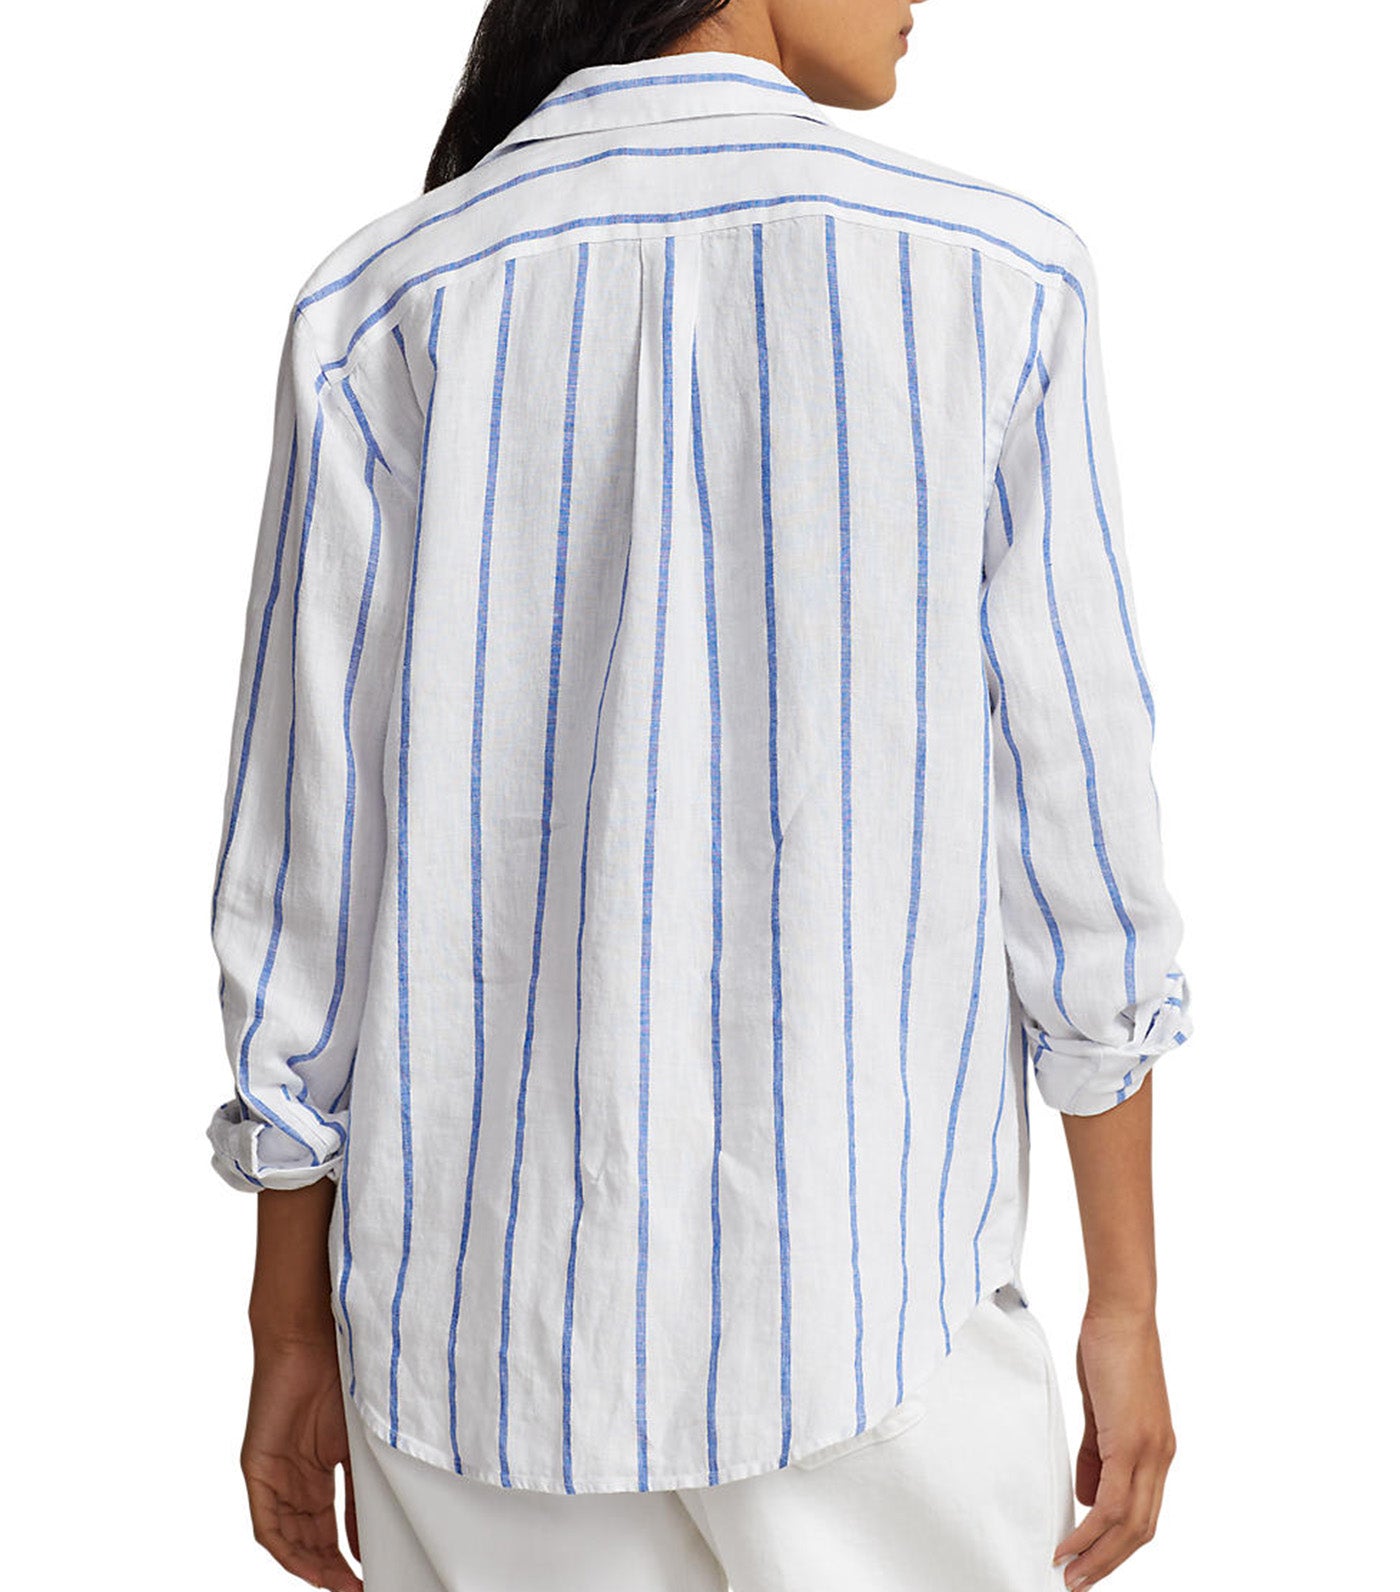 Women's Relaxed Fit Striped Linen Shirt White/Royal